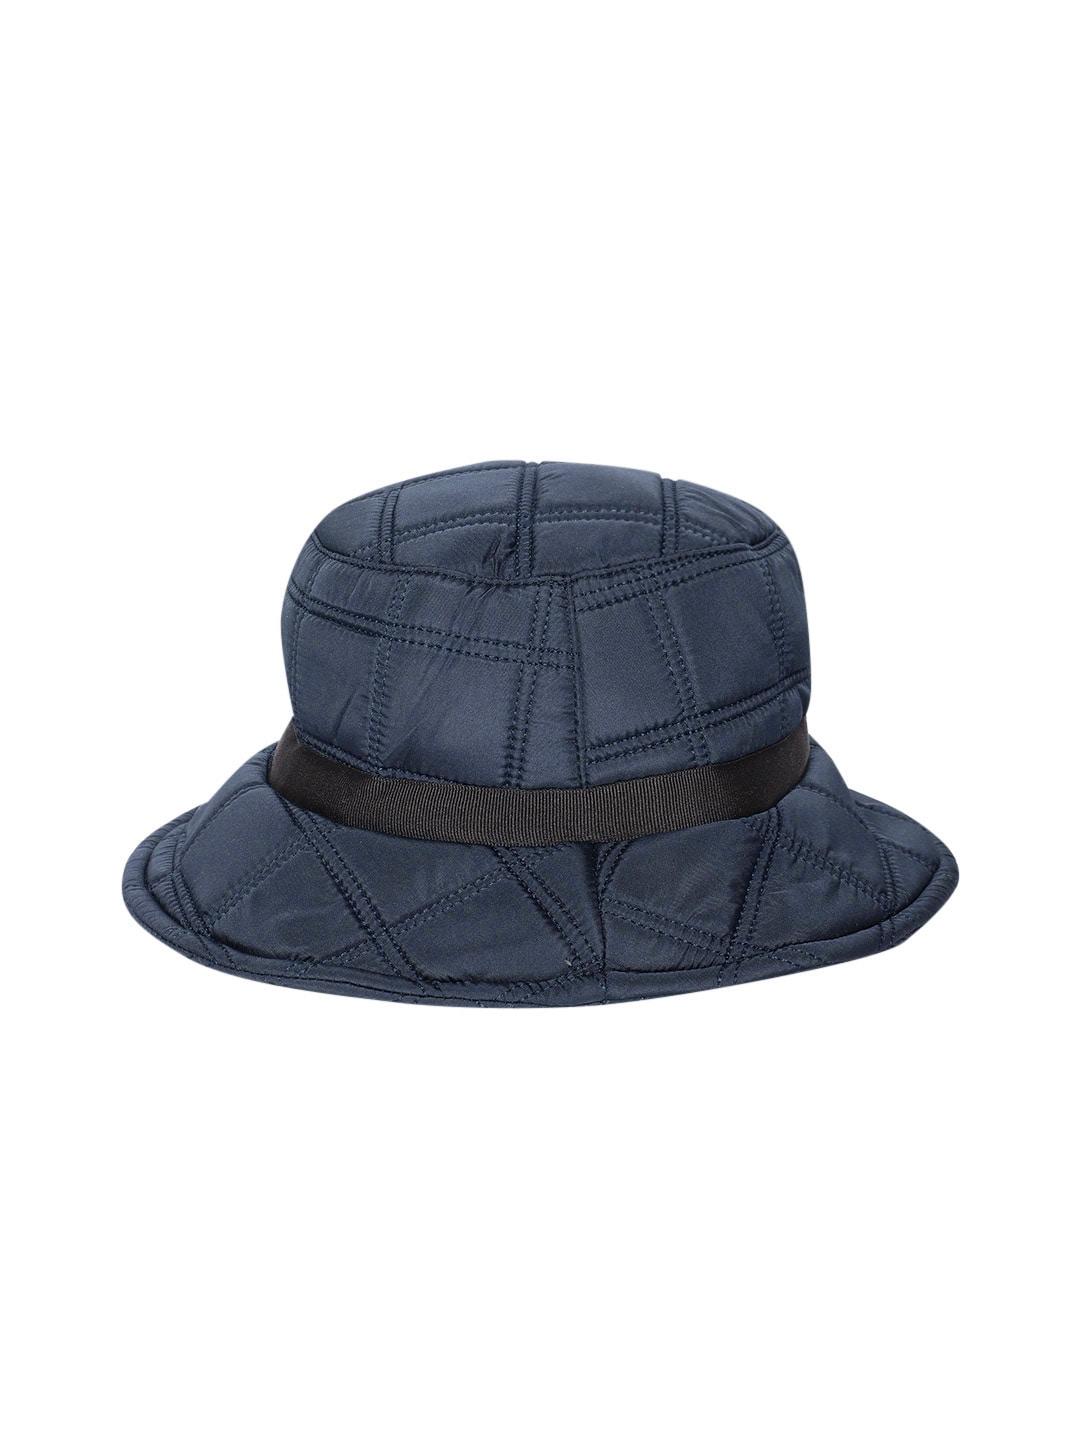 boohooman men padded quilted bucket hat